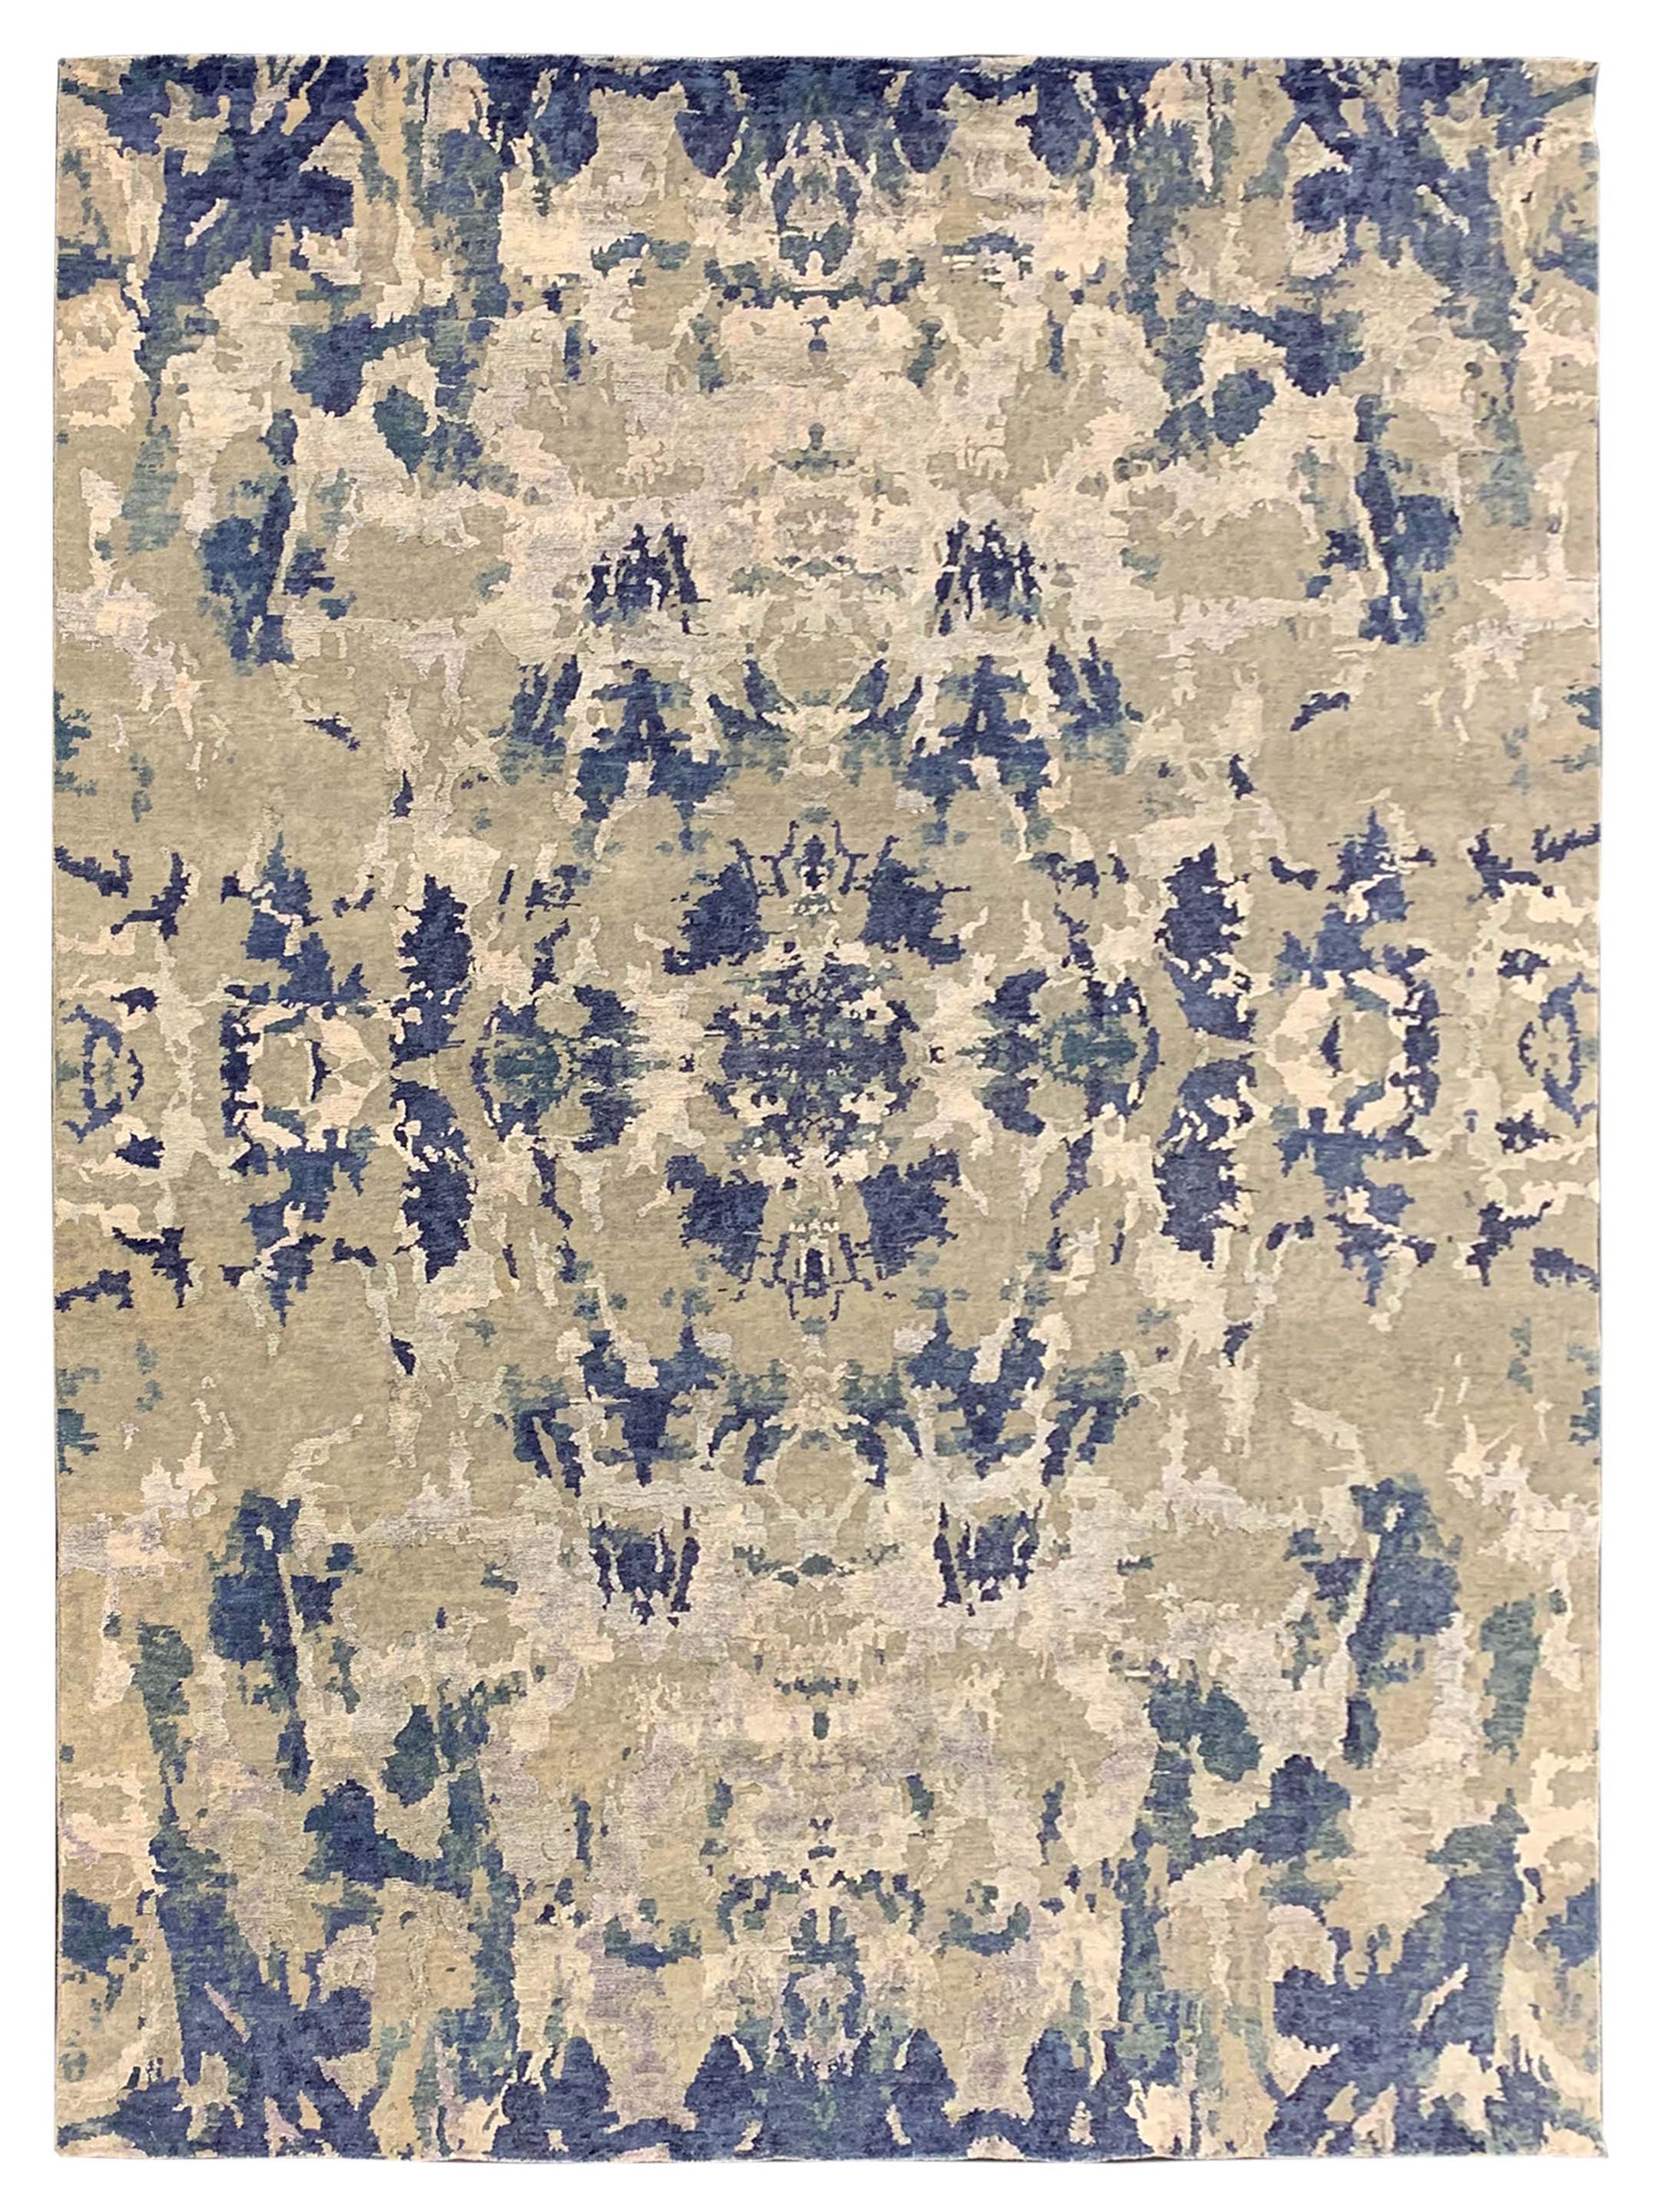 Artisan Mary MN-256 Silver Contemporary Knotted Rug